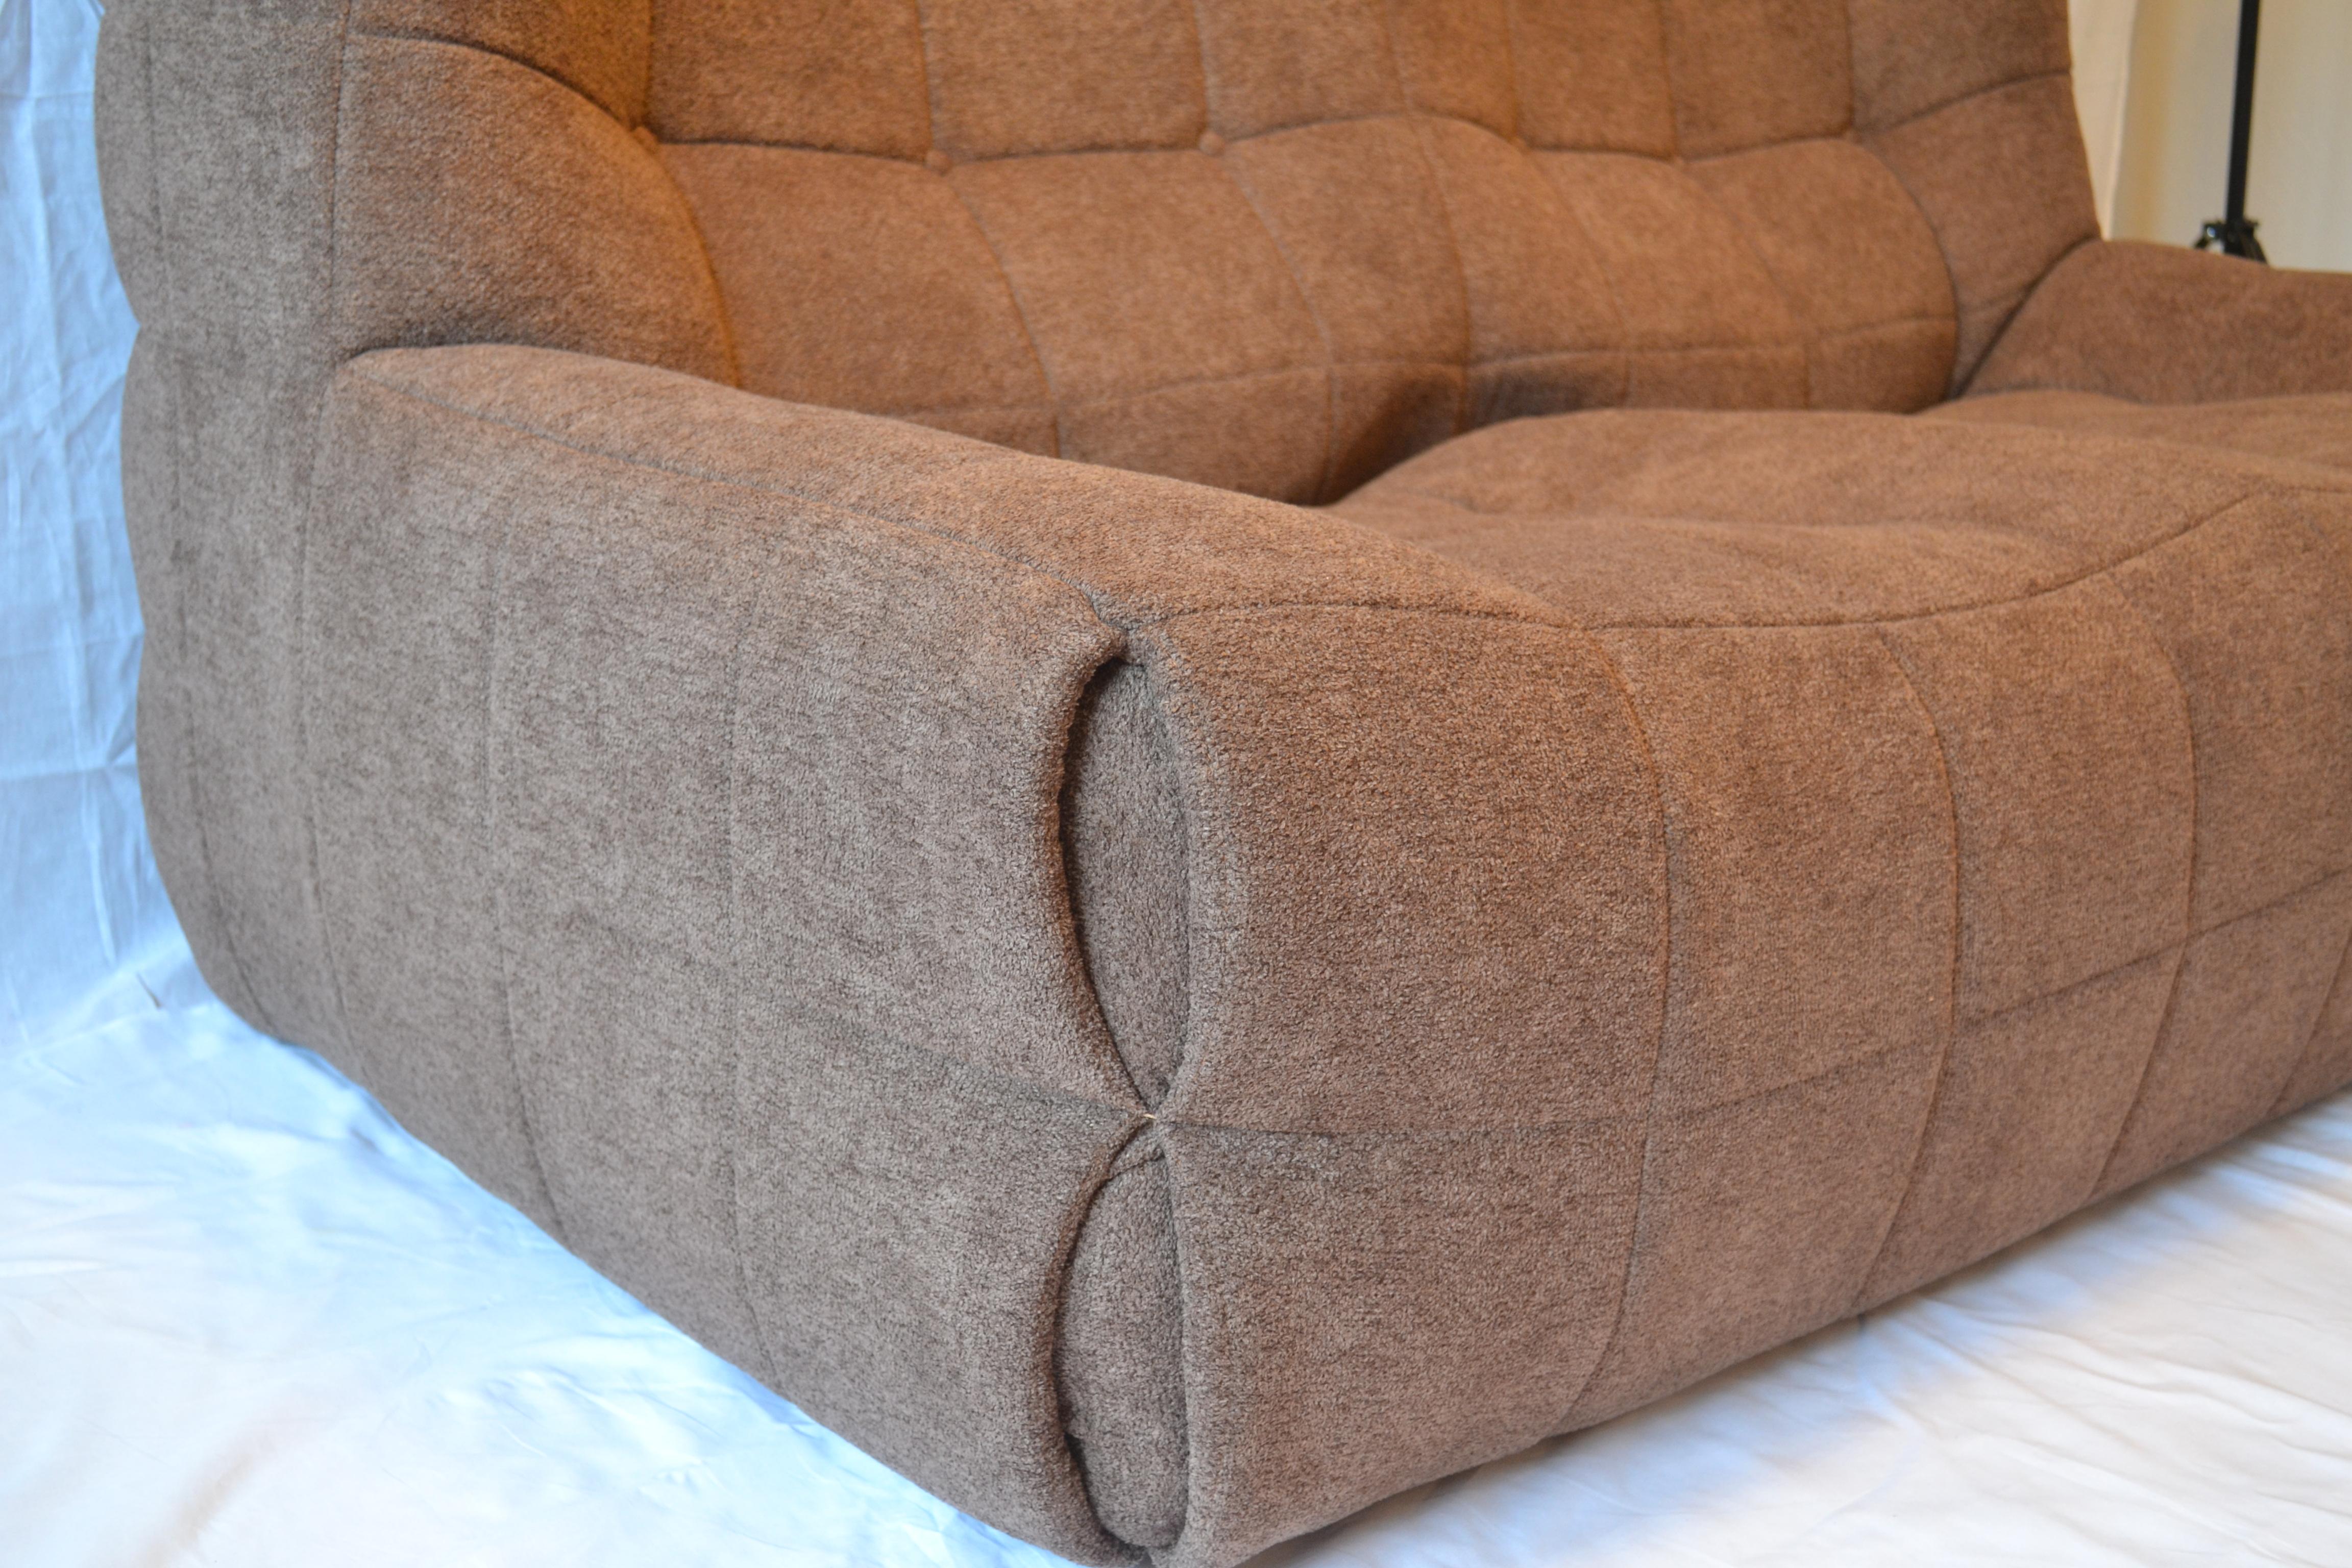 Kashima sofa, designed by Michel Ducaroy, Ligne Roset, 1970s. Original and signed sofa. The sofa has been covered with a new, high-quality material. A timeless form and extremely comfortable to use.